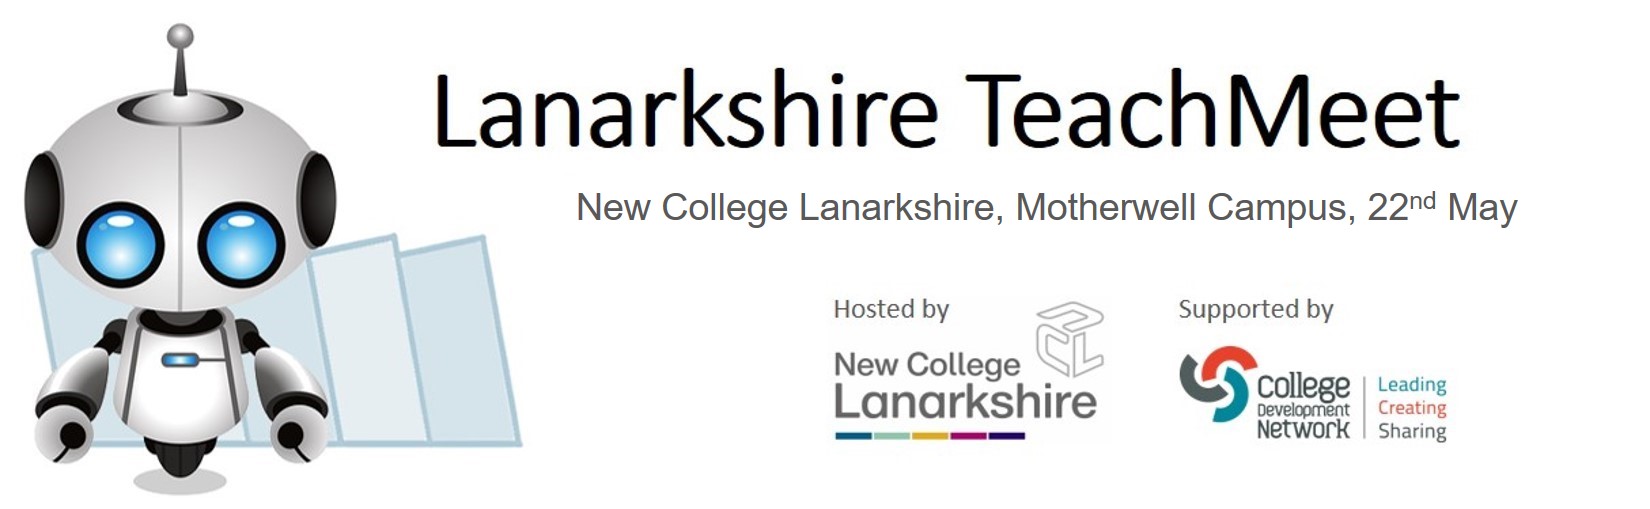 TeachMeet Lanarkshire, 22 May, hosted by New College Lanarkshire and supported by College Development Network